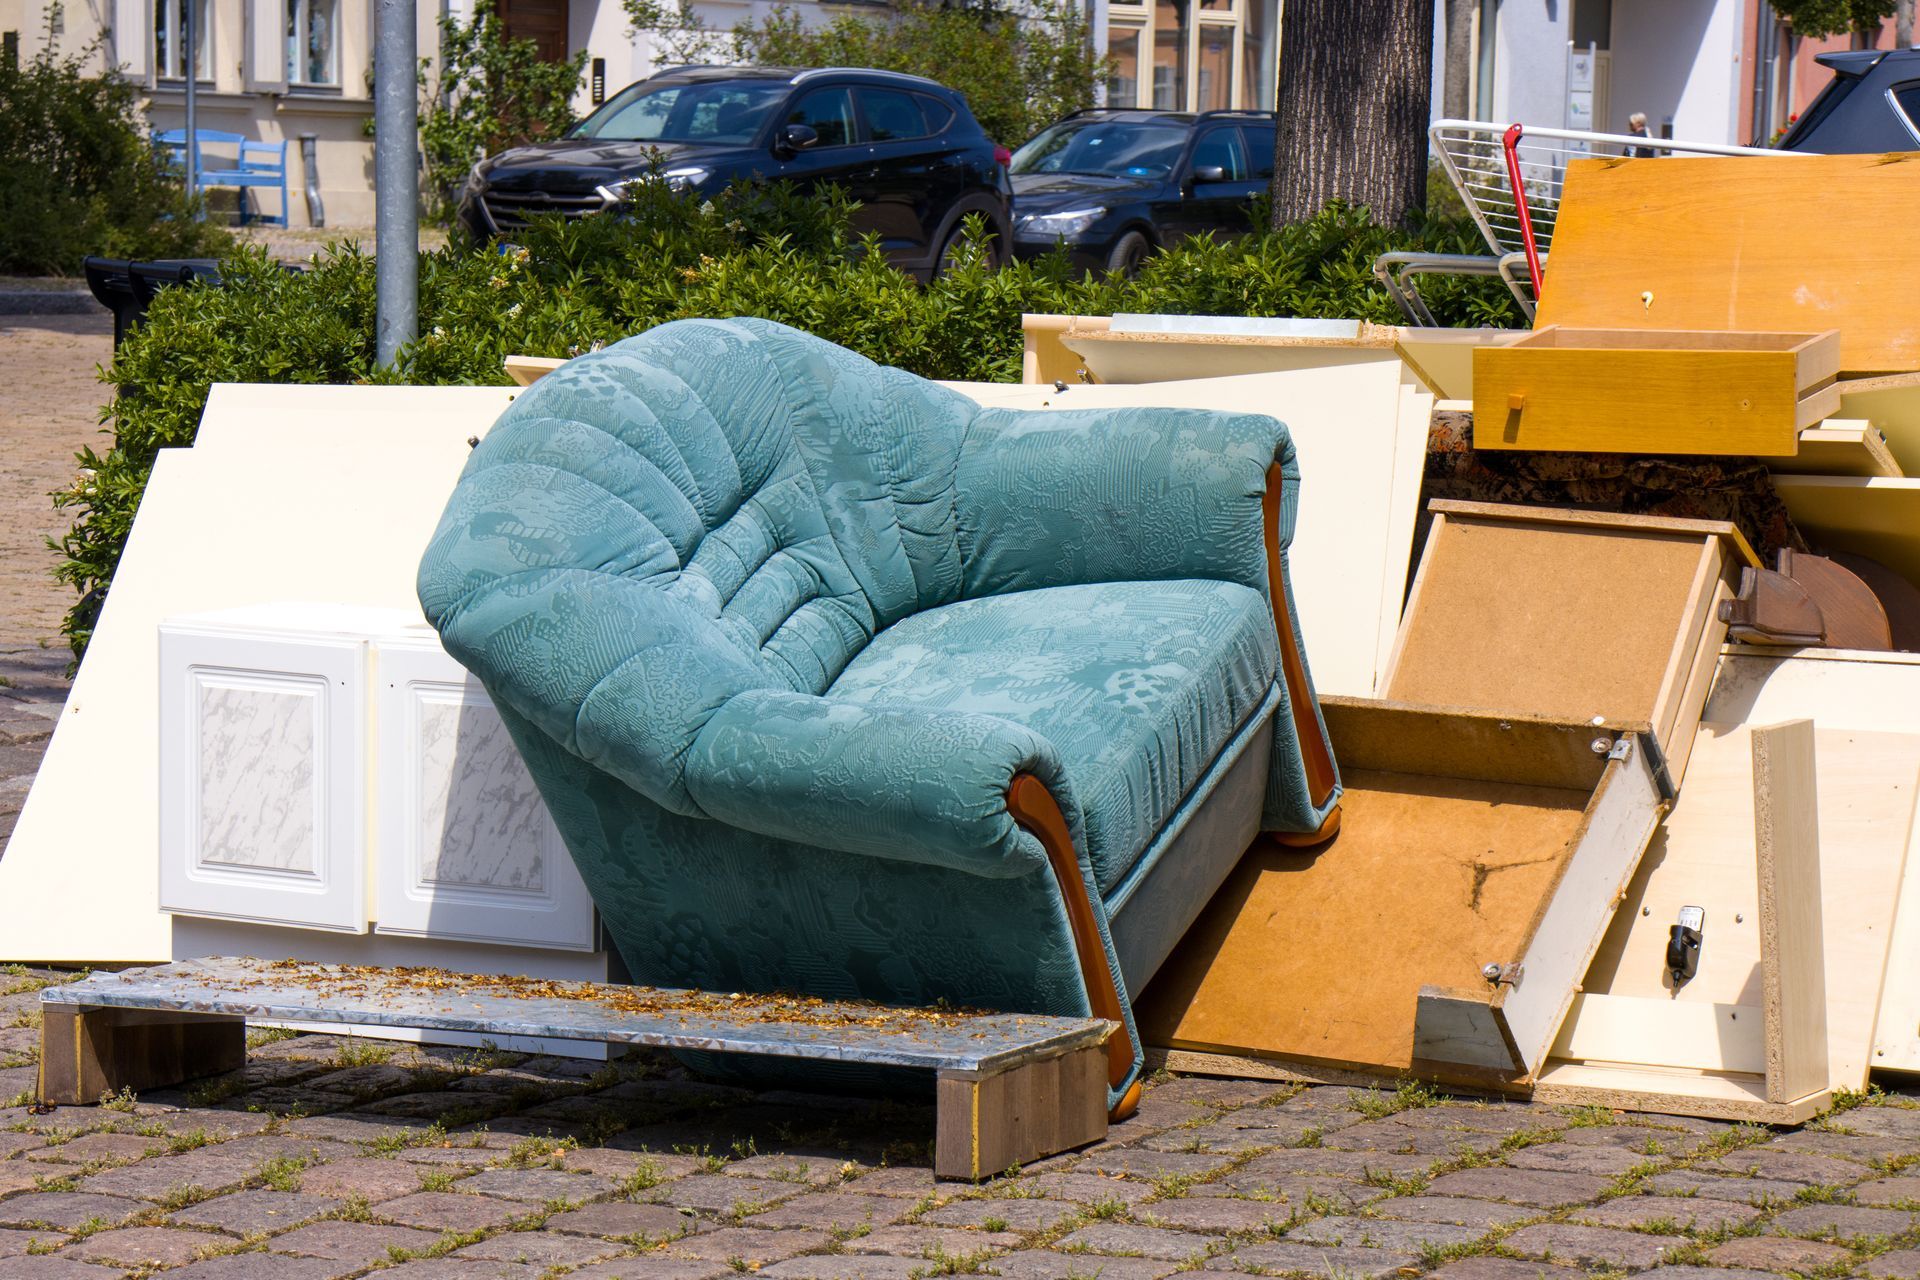 House furniture's junk on the street